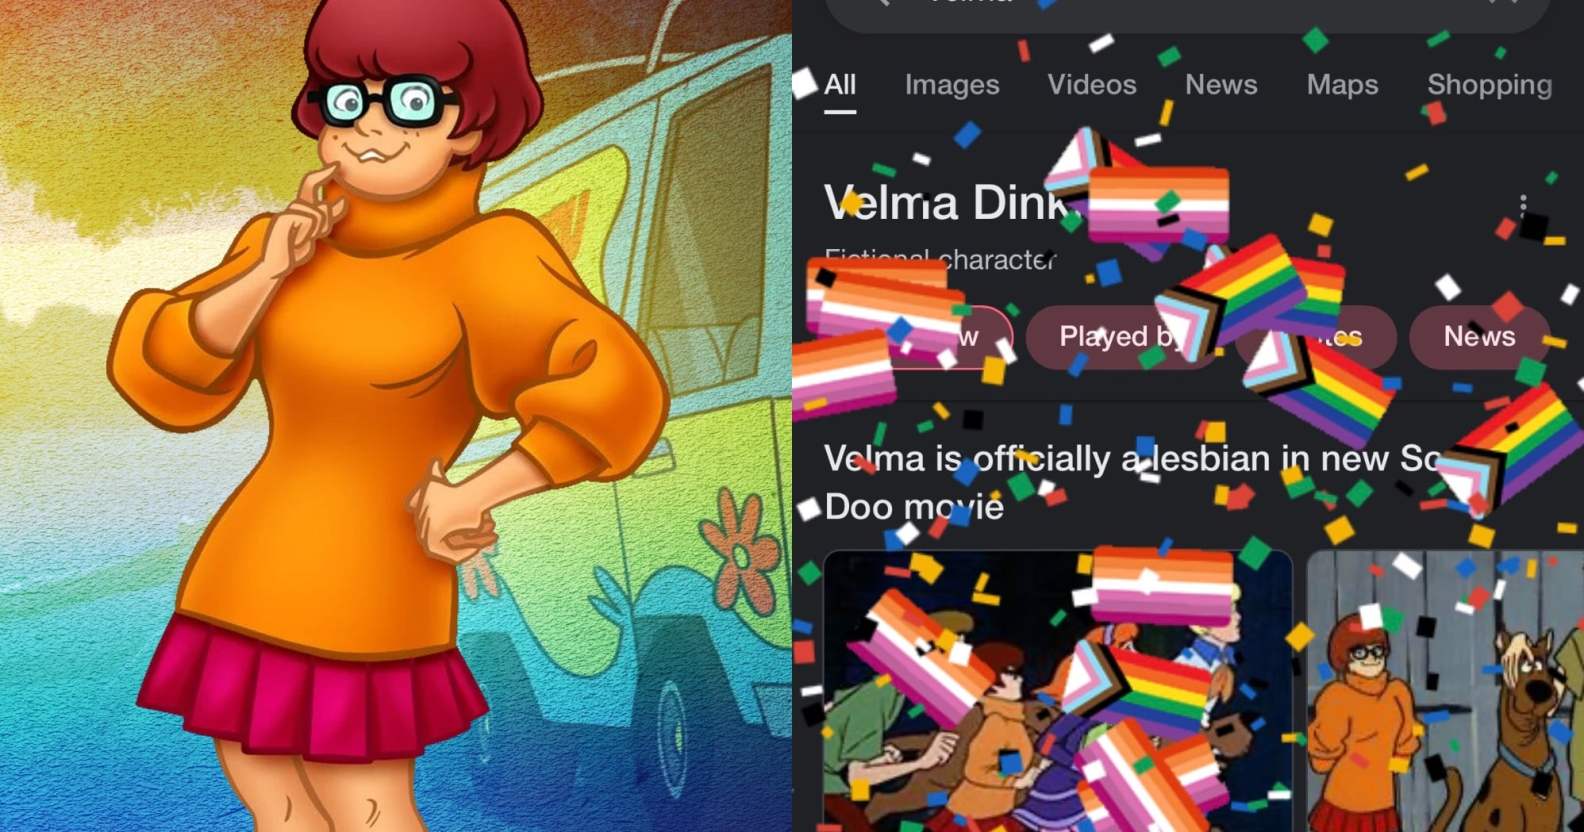 A split-screen image showing Scooby-Doo character Velma Dinkley next to a screenshot from a Google search of Velma with Pride and confetti graphics falling down